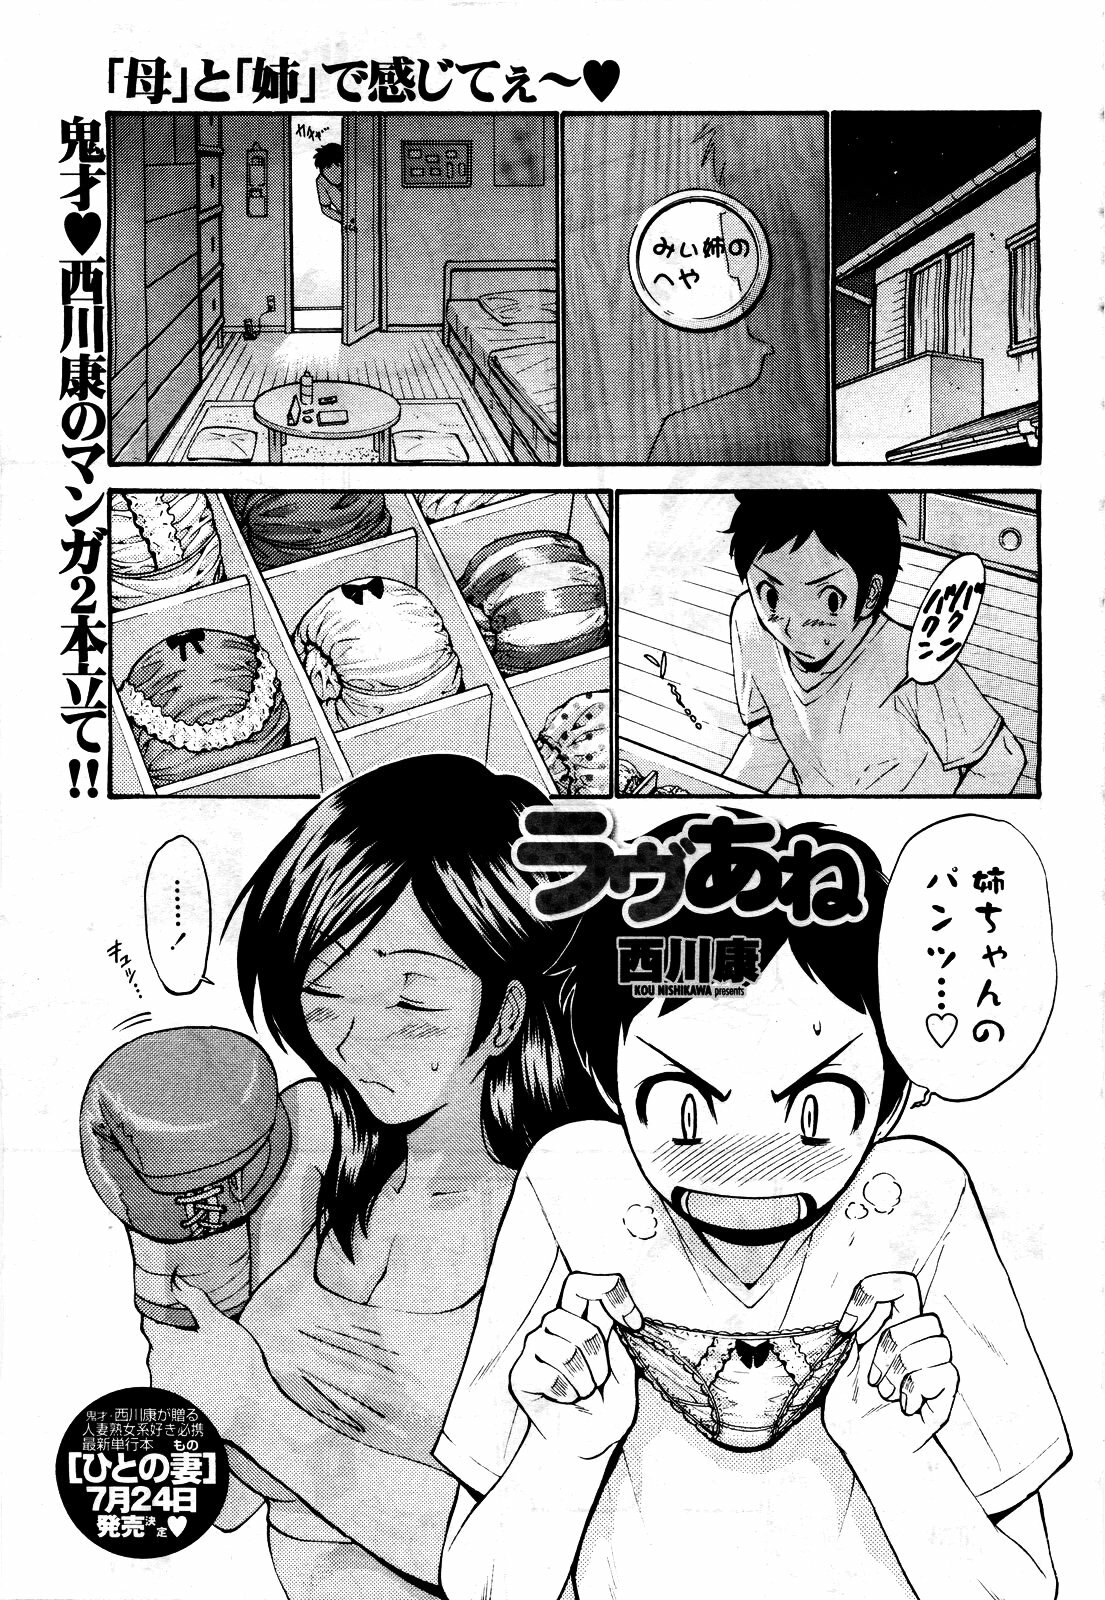 COMIC Momohime 2010-06 page 51 full